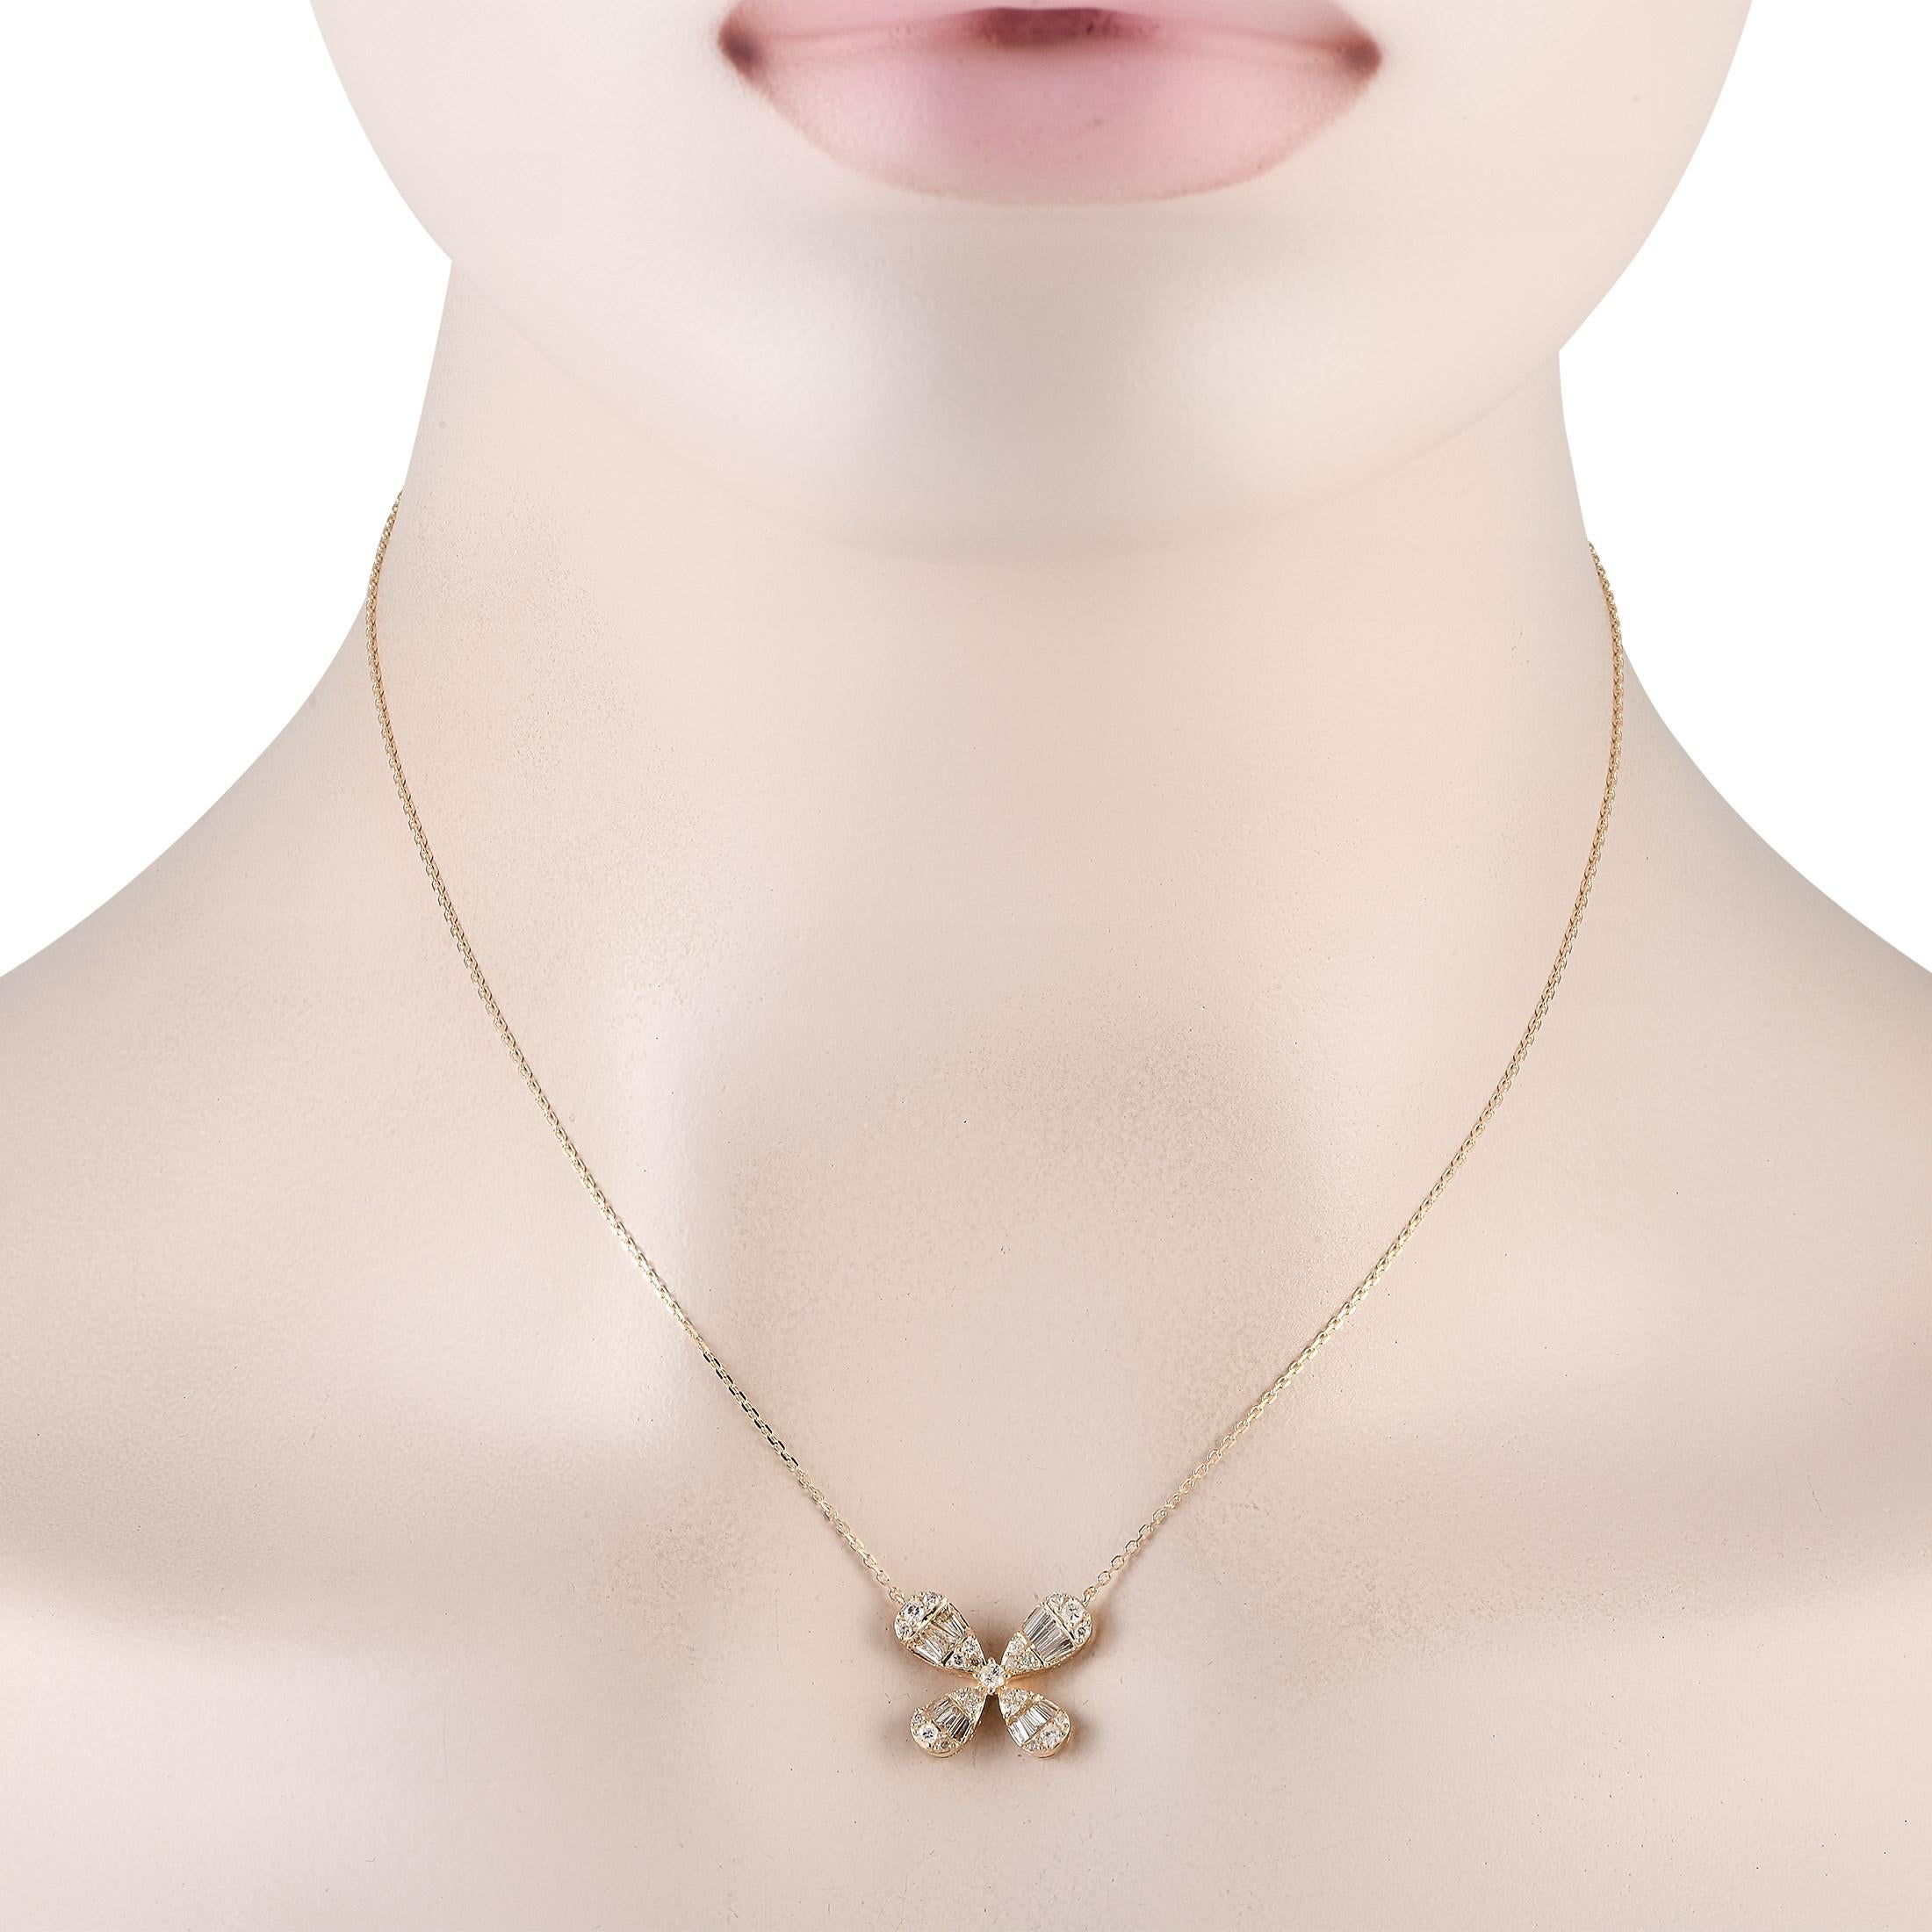 Delicate and feminine, this diamond necklace has an easy-going vibe that can instantly freshen up any look. It features a 16 chain in 14K yellow gold holding a flower-inspired pendant with four pear-shaped petals. A combination of round and tapered